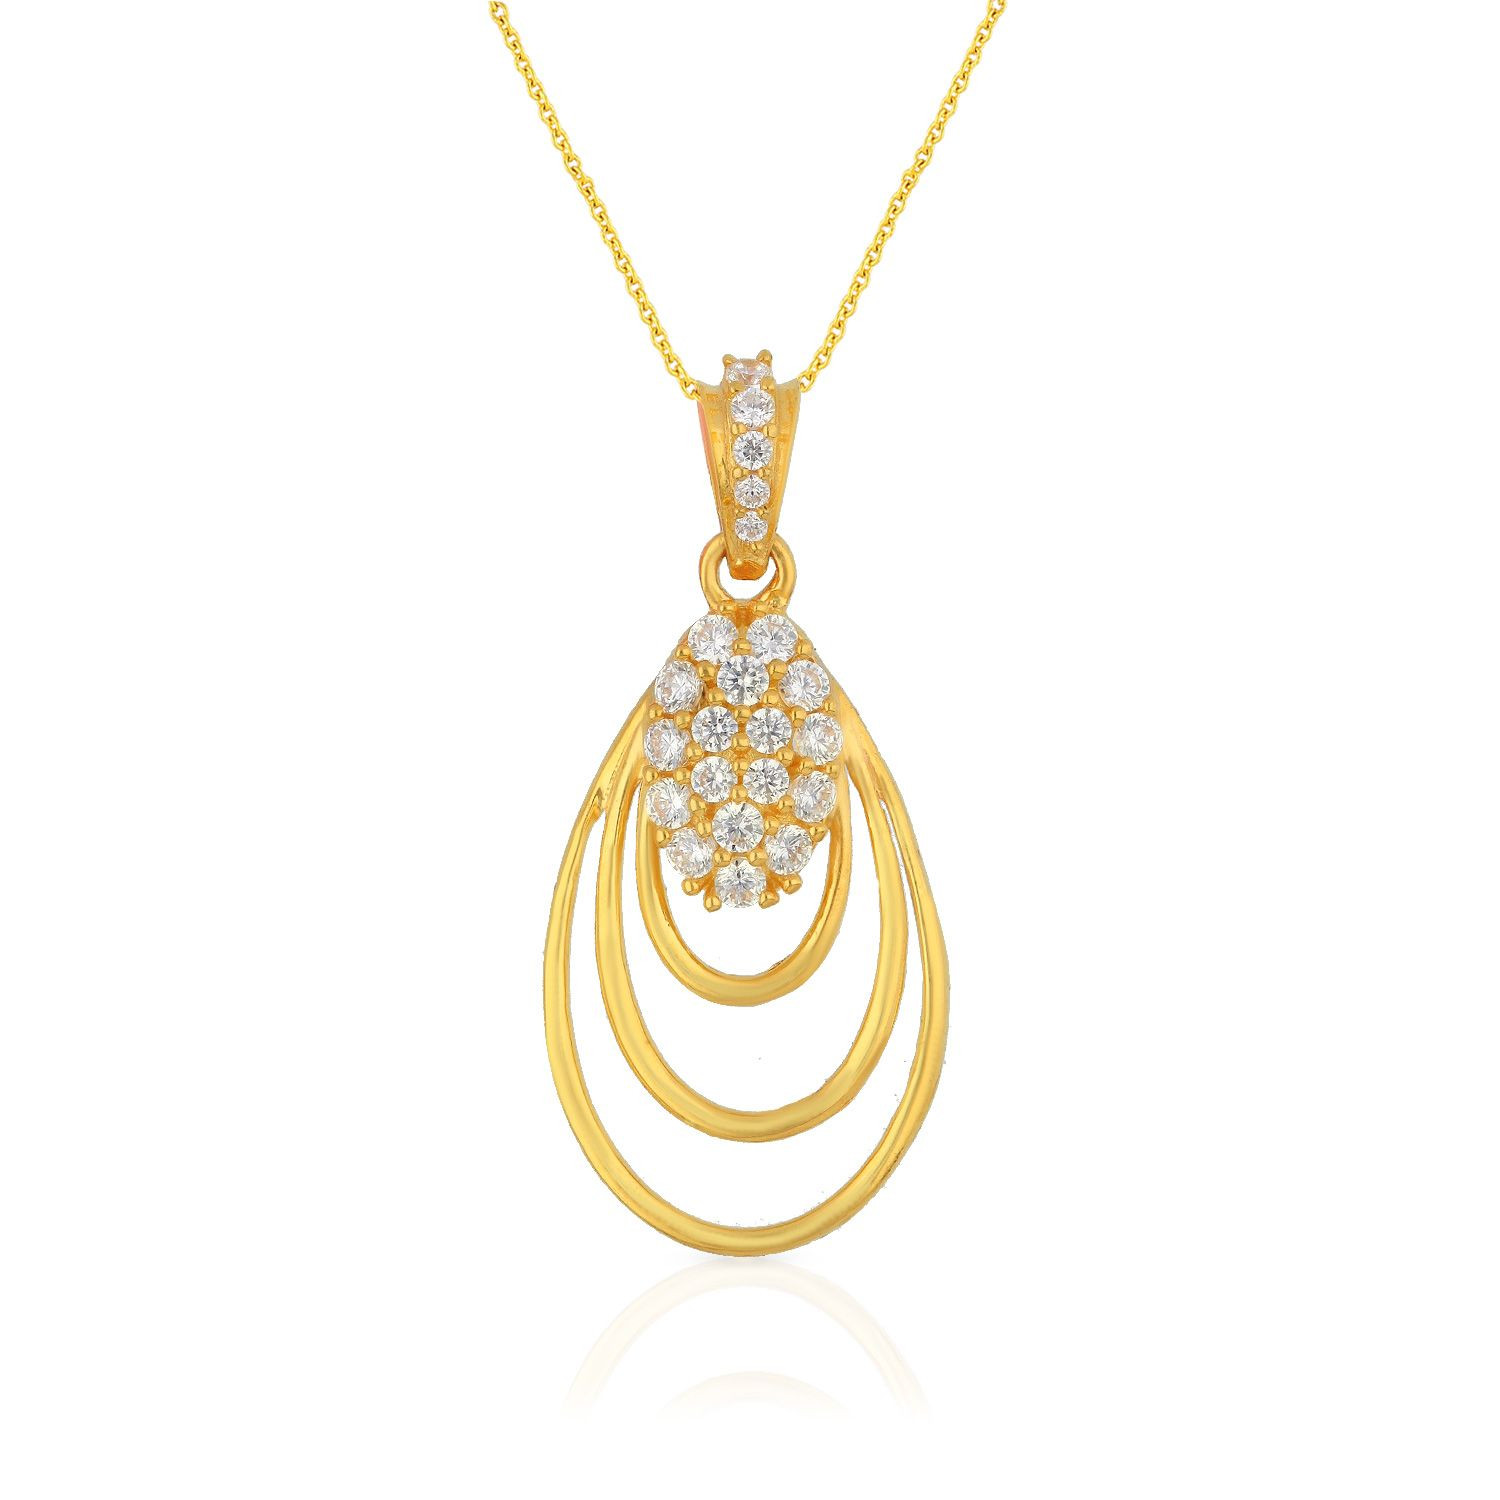 Malabar 22 KT Gold Studded Casual Pendant PDSKGP1076A